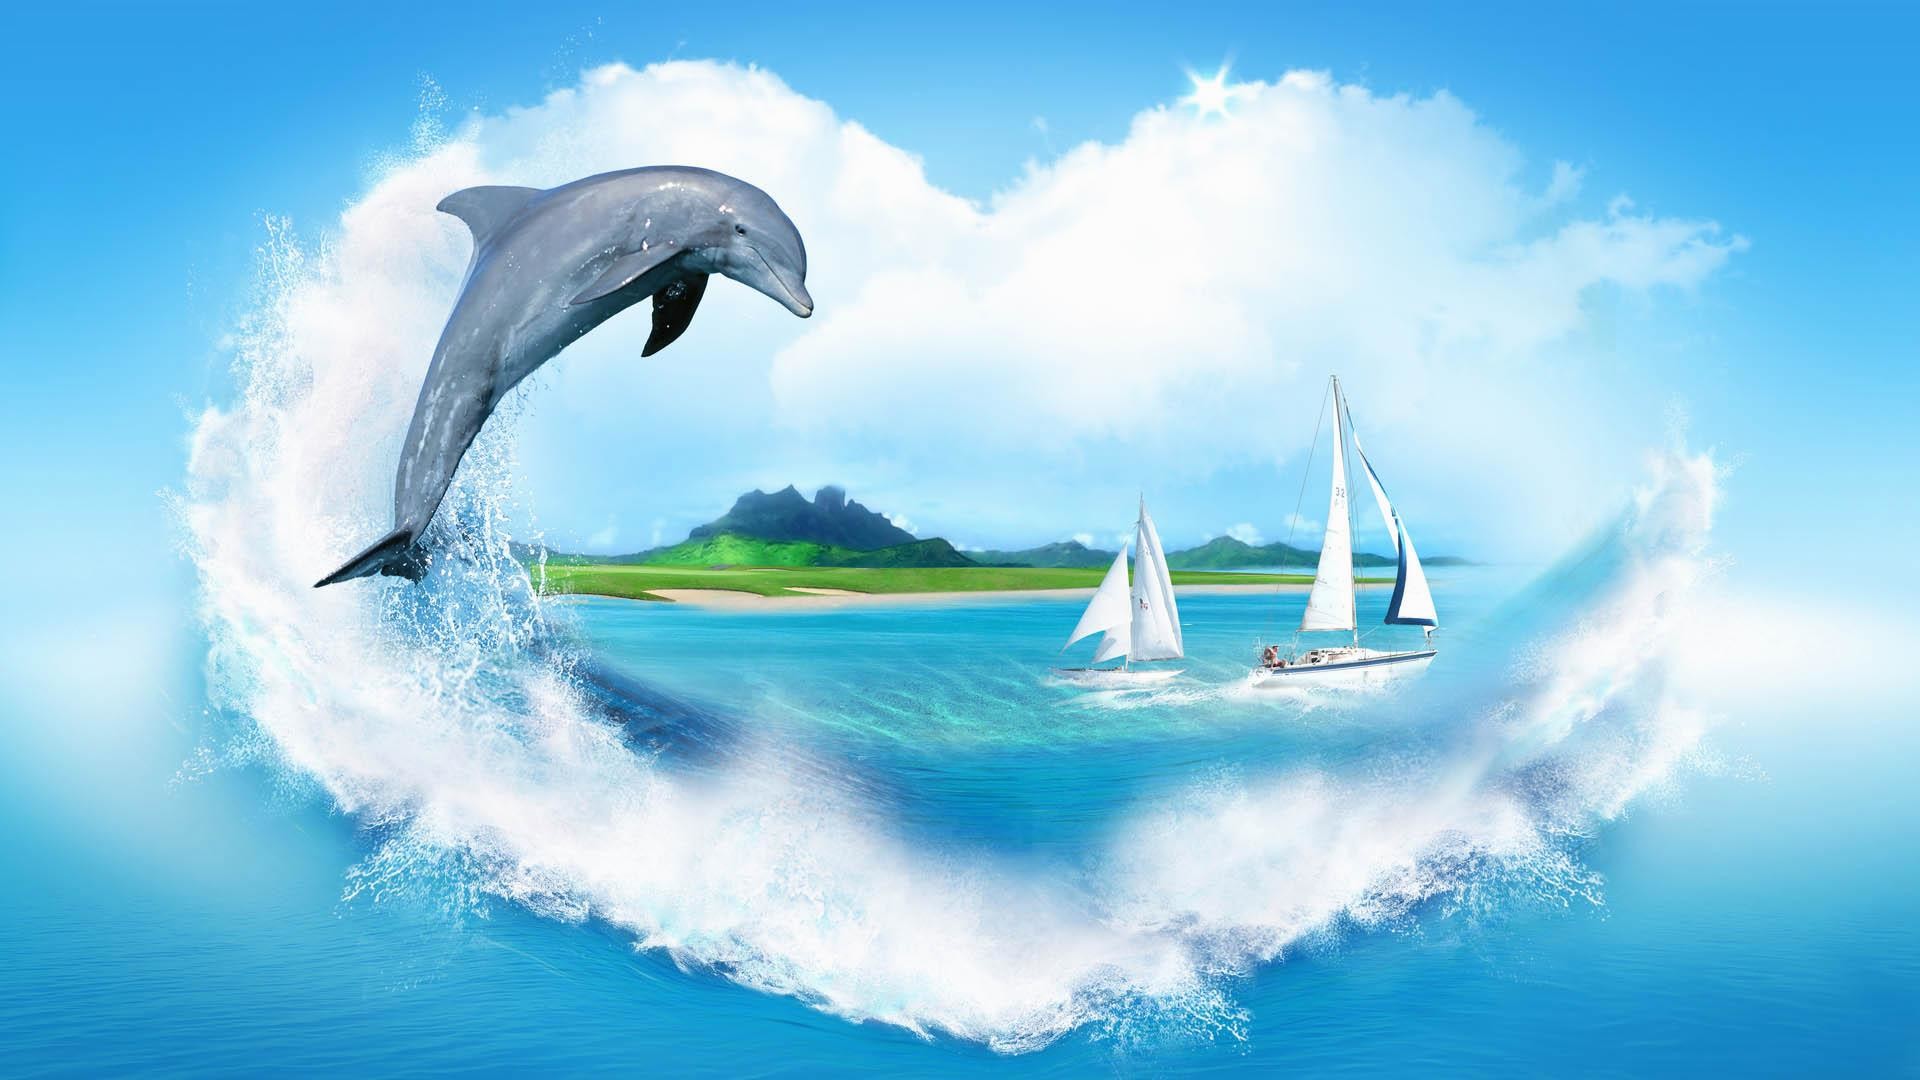 1920x1080 dolphin-Best-Background-Hd--wallpaper-wp6404444